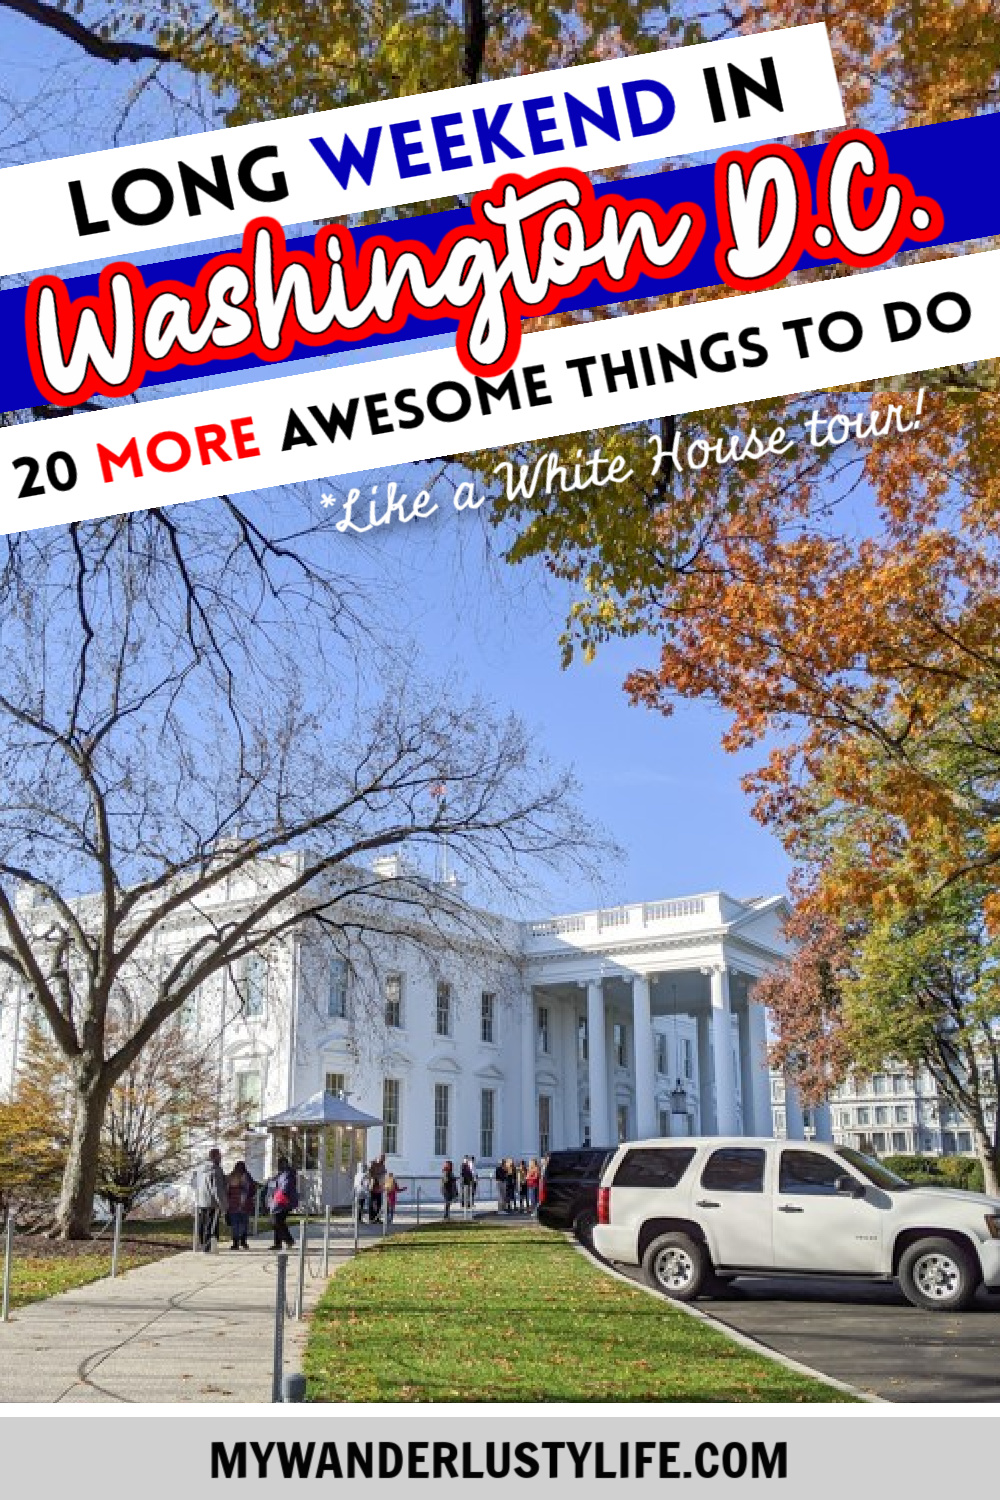 Another long weekend in Washington D.C., 20 more awesome things to see and do | like a White House tour! #whitehouse #washingtondc